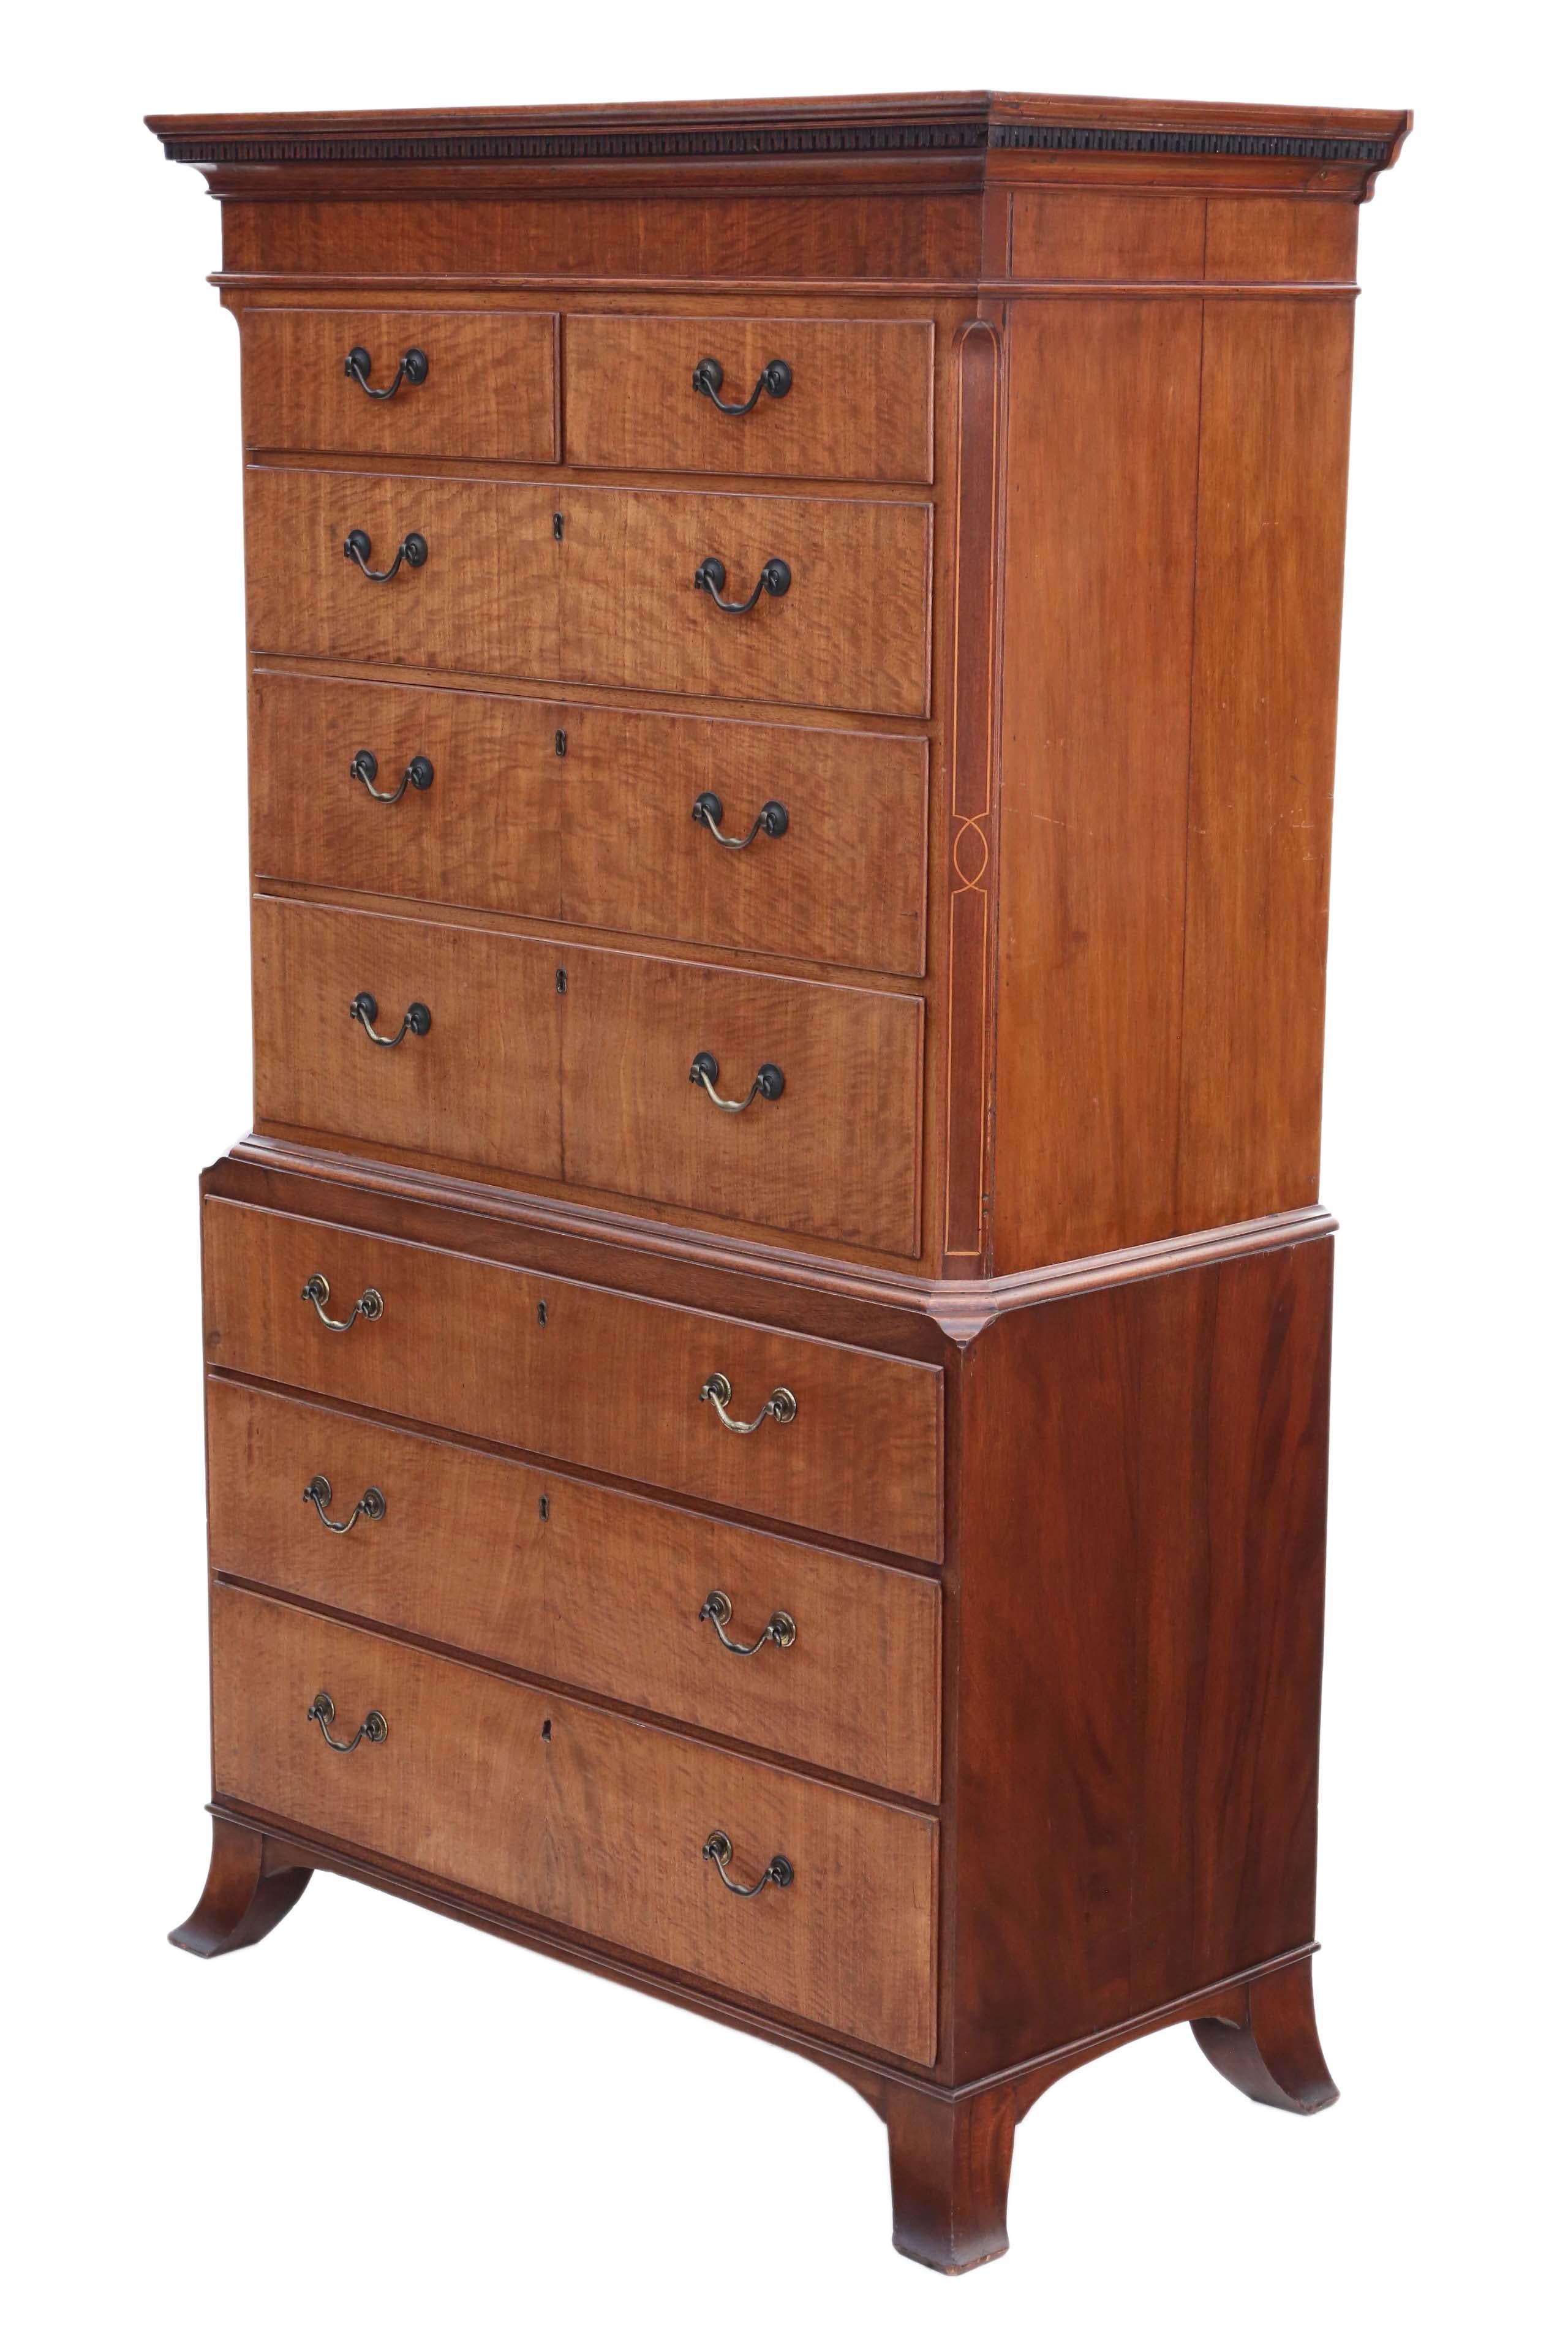 Antique 19th Century Inlaid Mahogany Tallboy Chest on Chest of Drawers For Sale 4